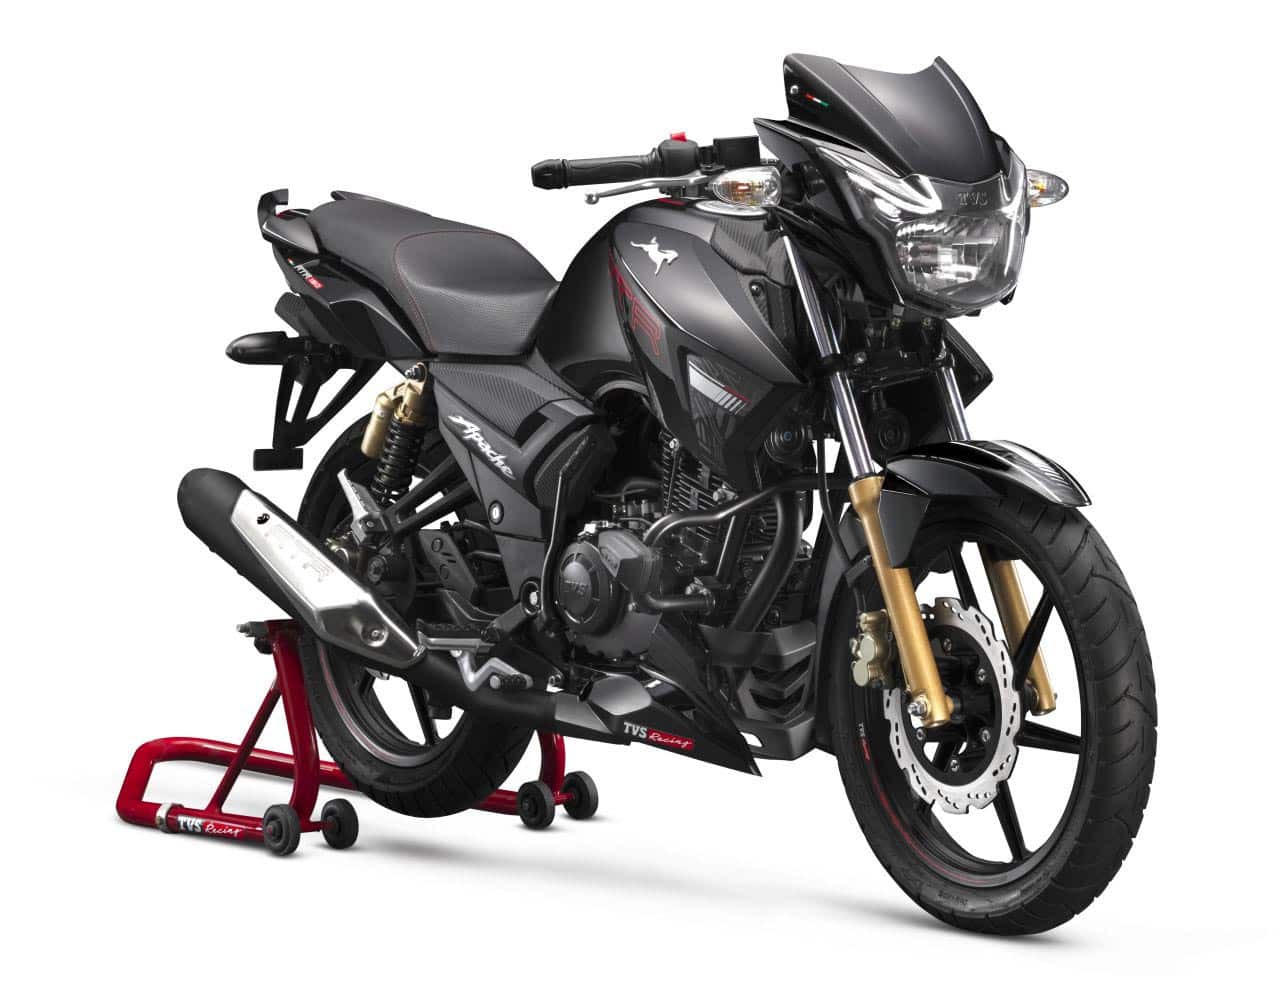 2020 Tvs Apache Rtr 180 Bs6 Launch Price Rs 1 01 Lakh